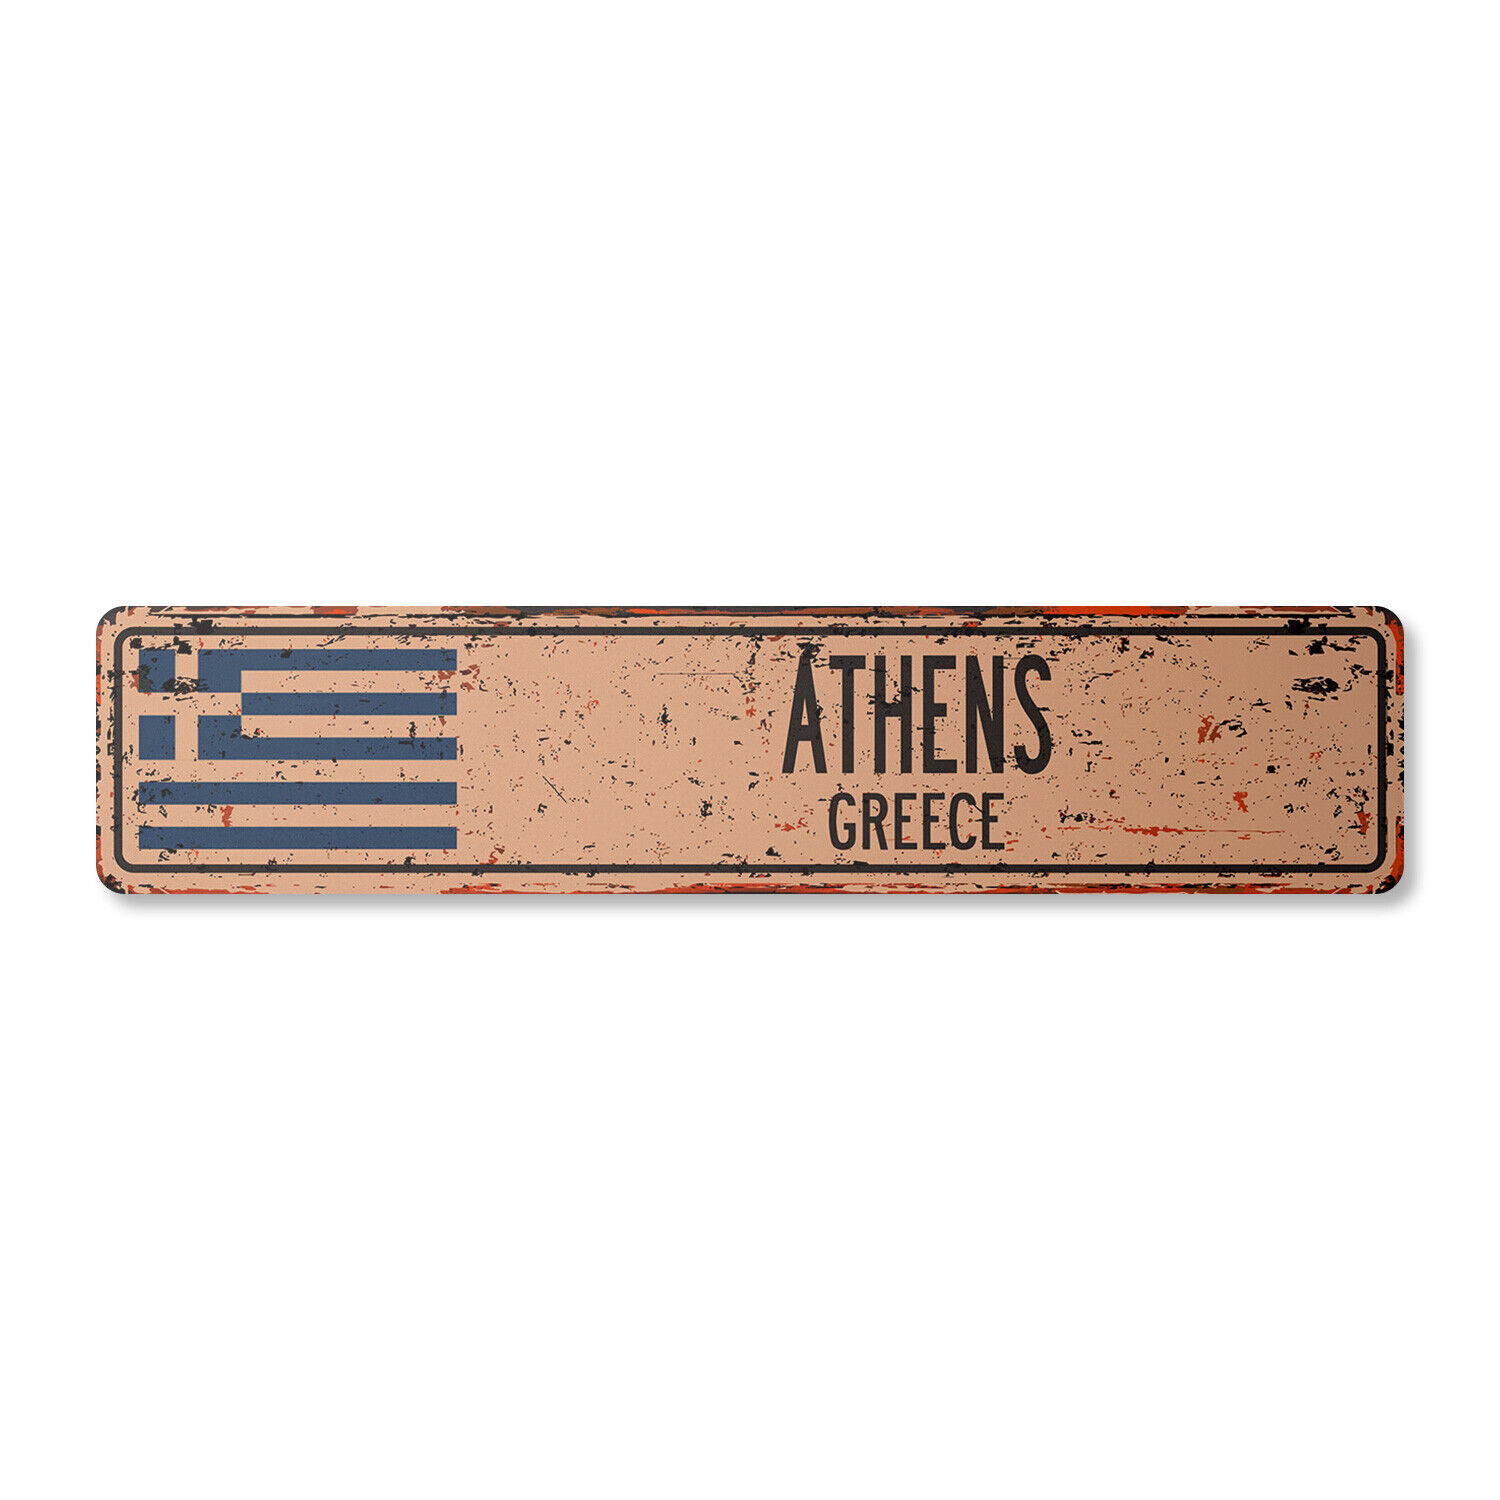 ATHENS GREECE Vintage Street Sign Greek Grecian flag city country road rustic